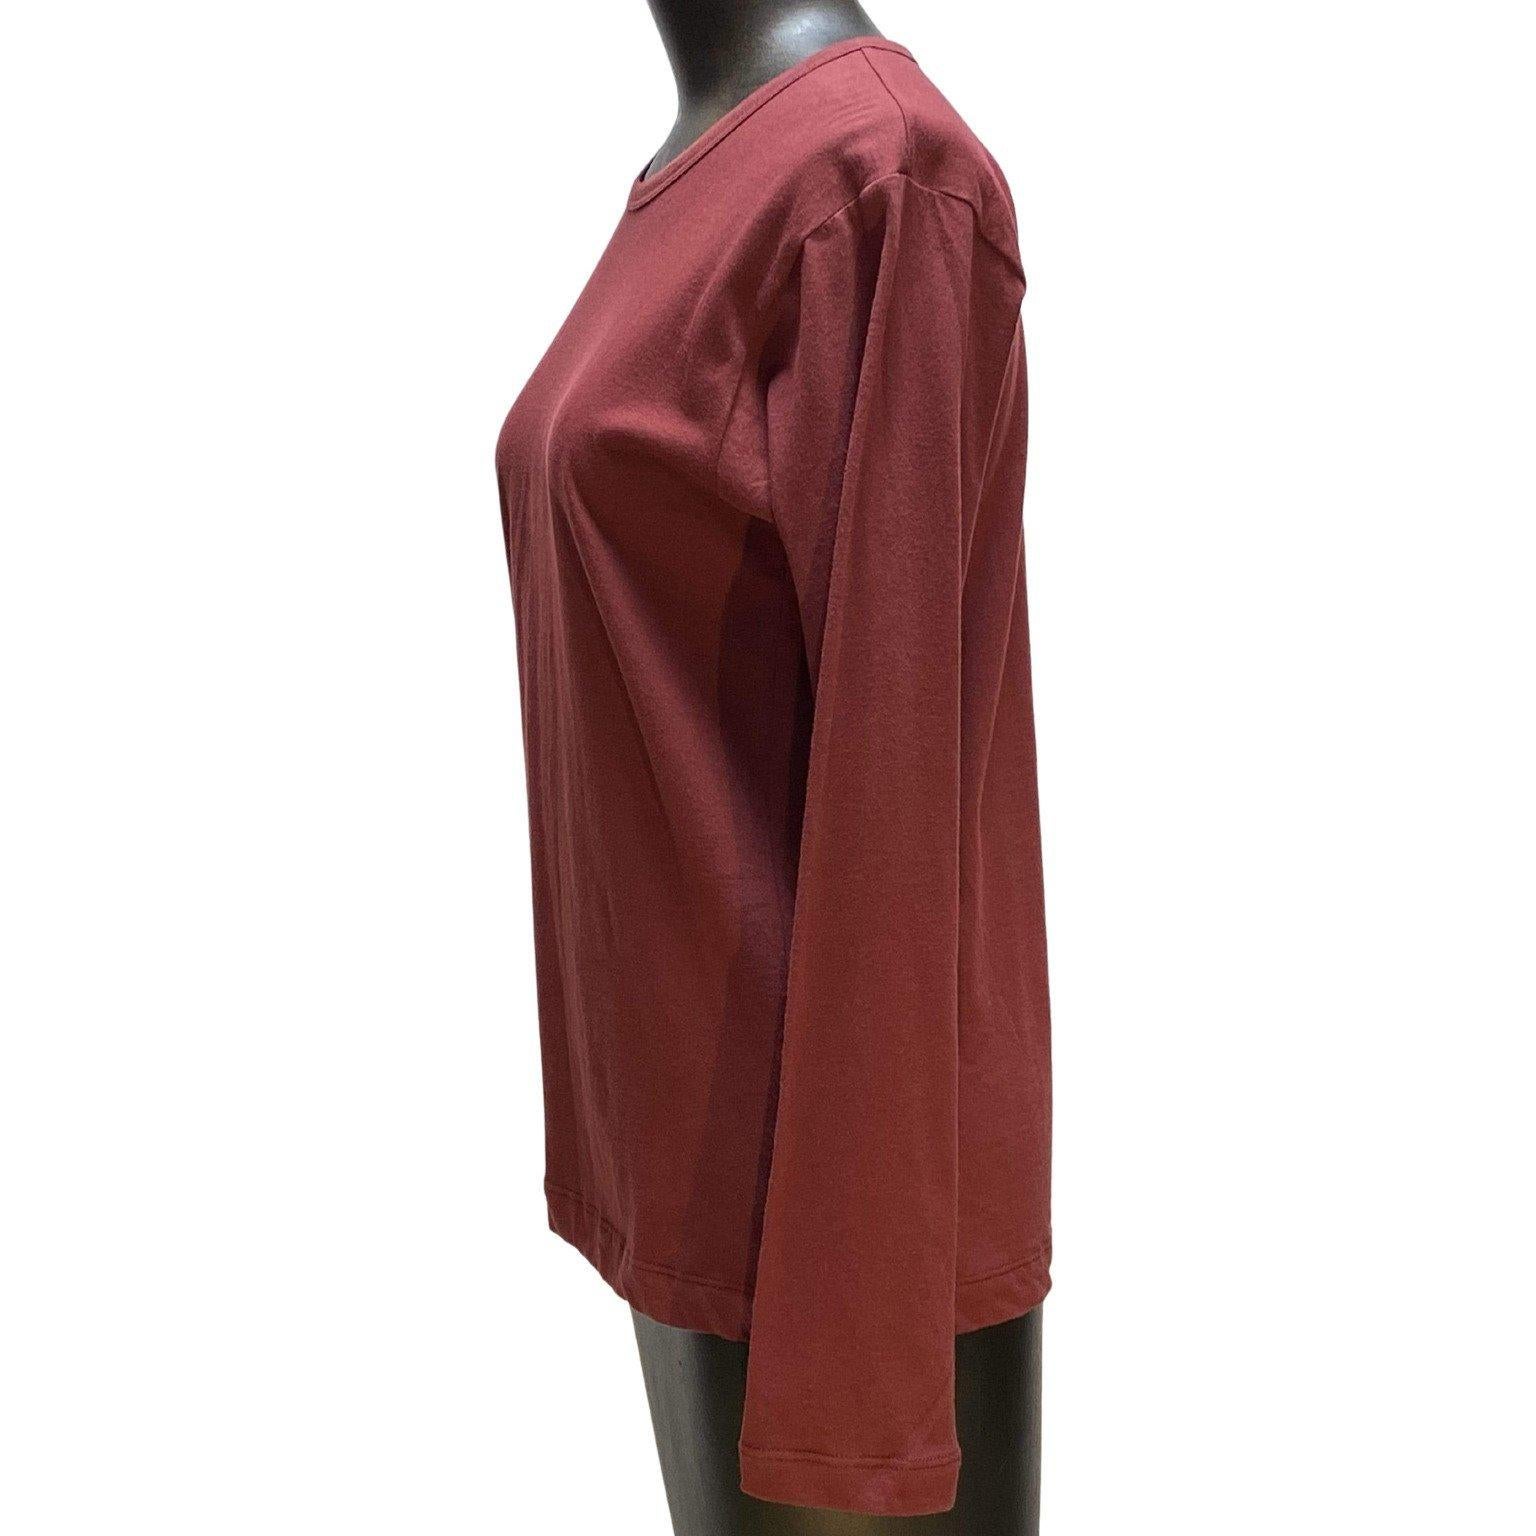 The flattering maroon color of this vintage Comme des Garçons top is not to be missed. This long sleeve top is constructed of 100% cotton and is semi-fitted.  